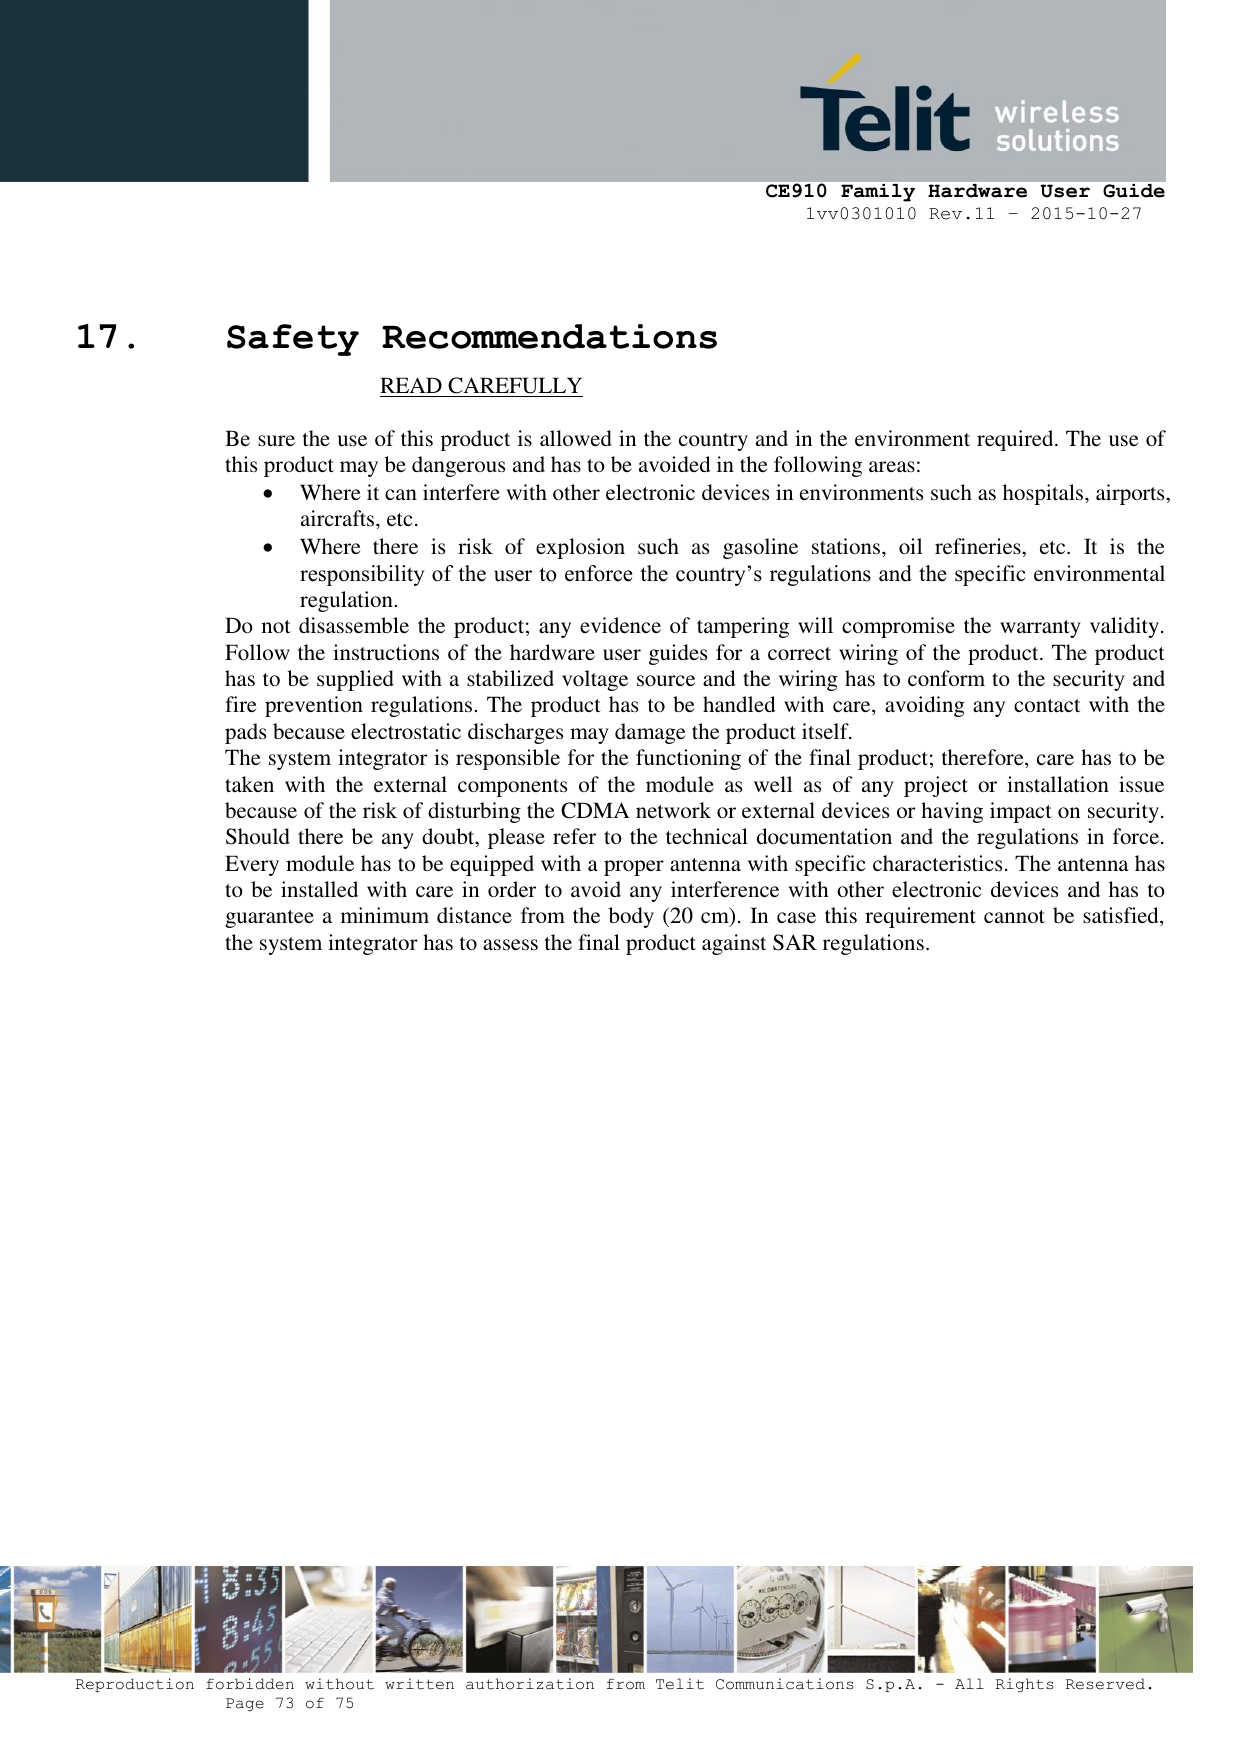     CE910 Family Hardware User Guide 1vv0301010 Rev.11 – 2015-10-27 Reproduction forbidden without written authorization from Telit Communications S.p.A. - All Rights Reserved.    Page 73 of 75                                                     17. Safety Recommendations                            READ CAREFULLY  Be sure the use of this product is allowed in the country and in the environment required. The use of this product may be dangerous and has to be avoided in the following areas:  Where it can interfere with other electronic devices in environments such as hospitals, airports, aircrafts, etc.  Where  there  is  risk  of  explosion  such  as  gasoline  stations,  oil  refineries,  etc.  It  is  the responsibility of the user to enforce the country’s regulations and the specific environmental regulation. Do not disassemble the product; any evidence of tampering will compromise the warranty validity.  Follow the instructions of the hardware user guides for a correct wiring of the product. The product has to be supplied with a stabilized voltage source and the wiring has to conform to the security and fire prevention regulations. The product has to be handled with care, avoiding any contact with the pads because electrostatic discharges may damage the product itself.  The system integrator is responsible for the functioning of the final product; therefore, care has to be taken  with  the  external  components  of  the  module  as  well  as  of  any  project  or  installation  issue because of the risk of disturbing the CDMA network or external devices or having impact on security. Should there be any doubt, please refer to the technical documentation and the regulations in force. Every module has to be equipped with a proper antenna with specific characteristics. The antenna has to be installed with care in order to avoid any interference with other electronic devices and has to guarantee a minimum distance from the body (20 cm). In case this requirement cannot be satisfied, the system integrator has to assess the final product against SAR regulations.   